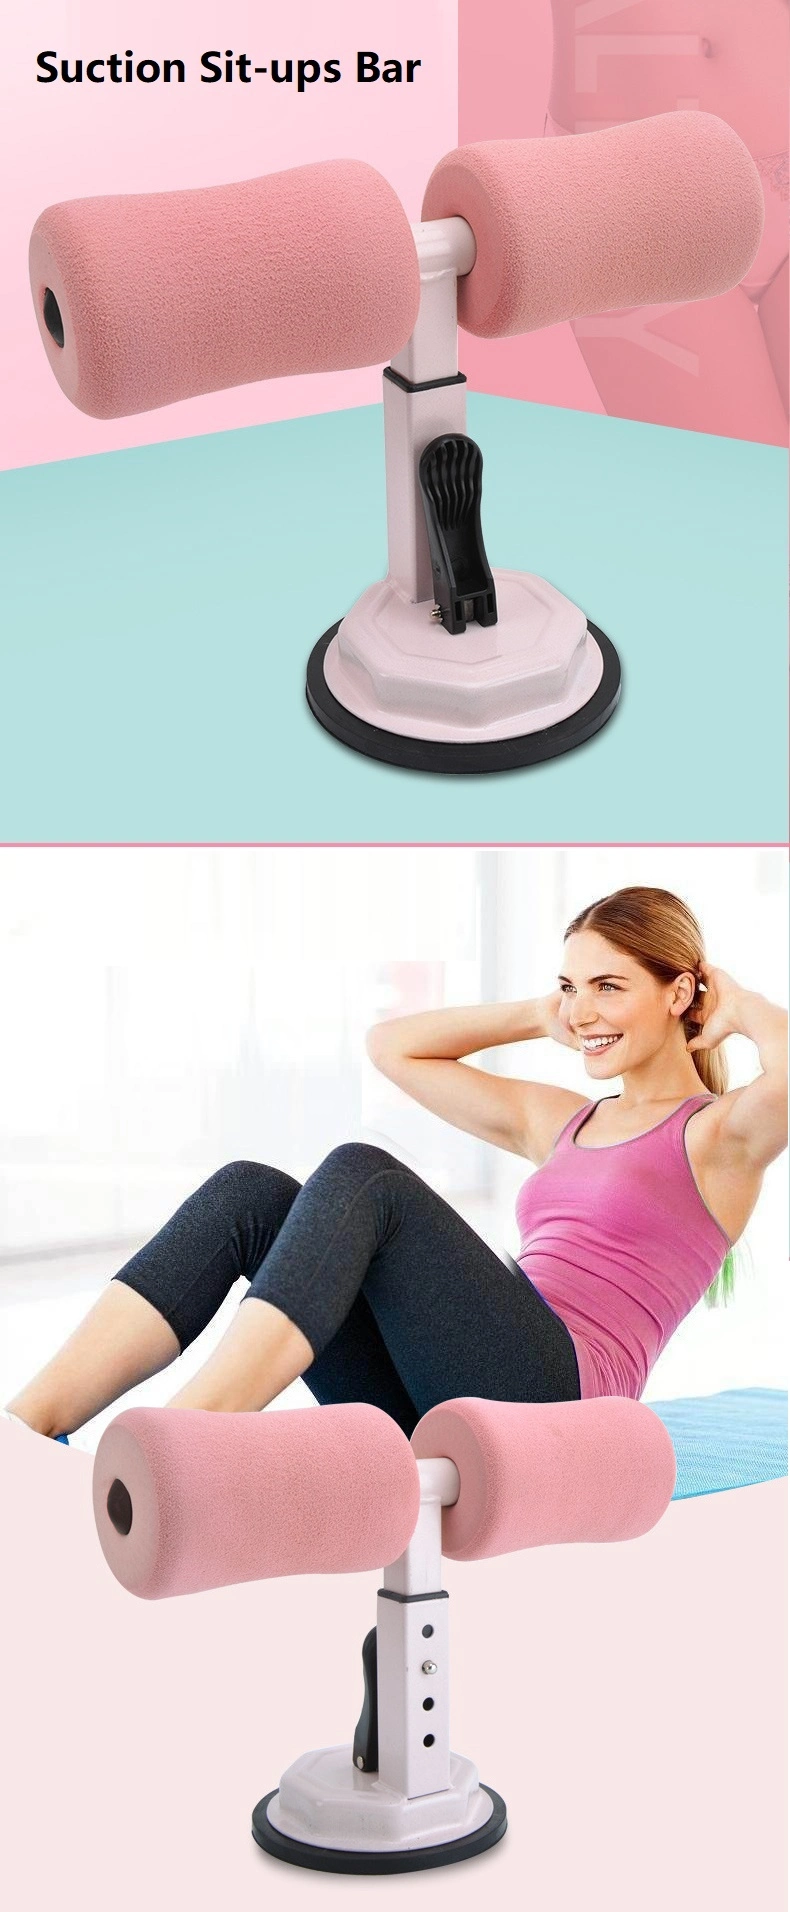 Portable Self Suction Sit up Assistant Device with 4 Adjustable Positions